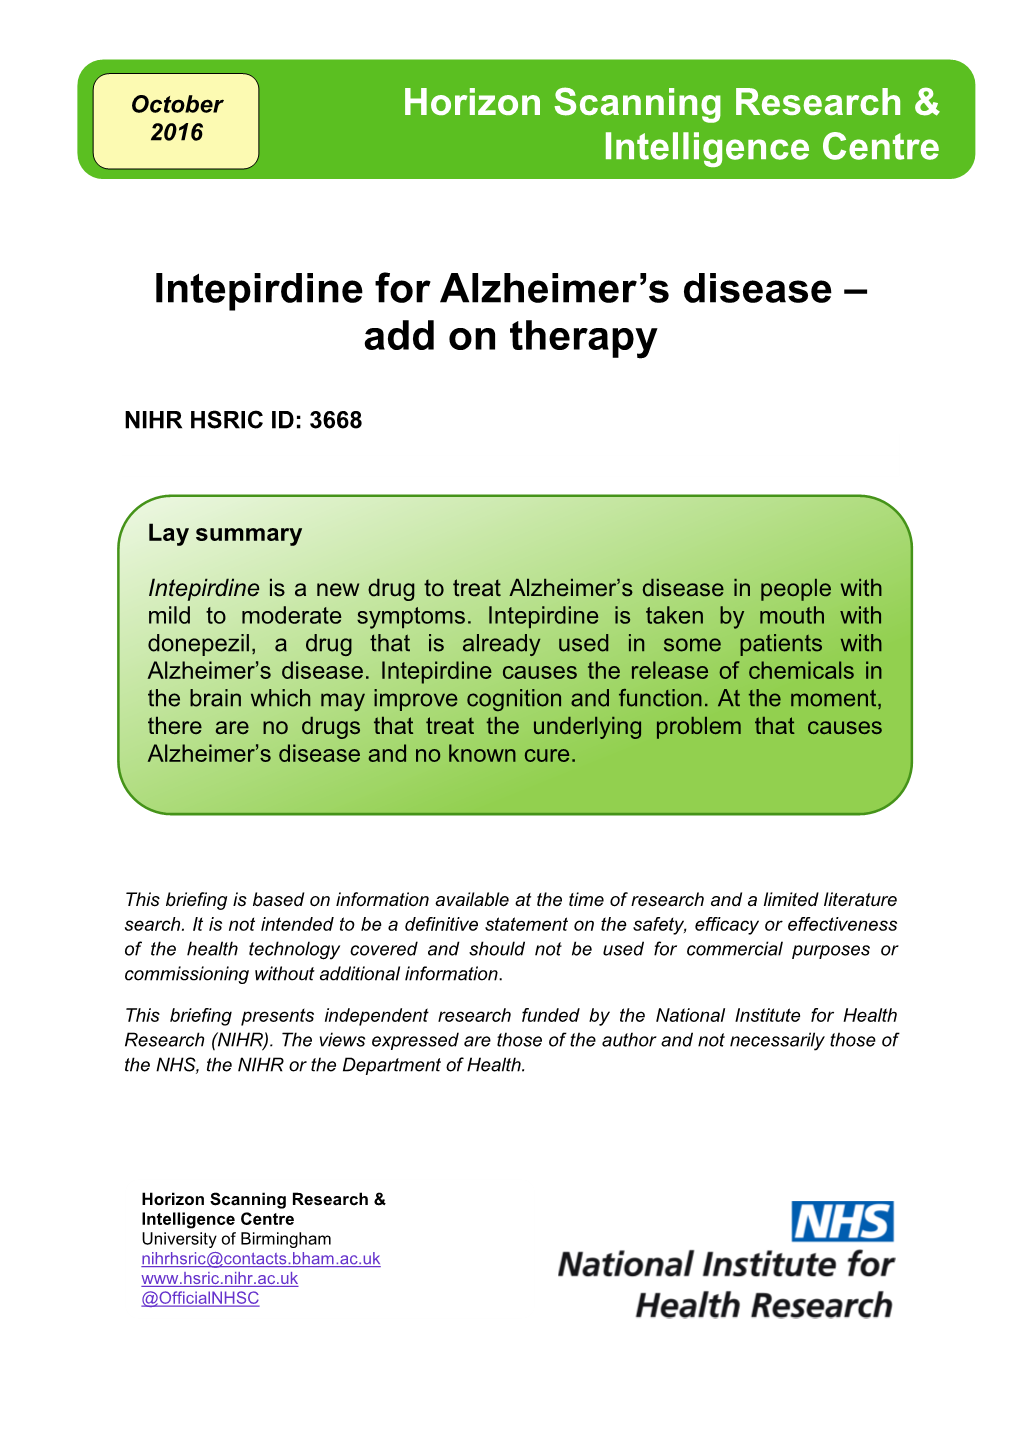 Intepirdine for Alzheimer's Disease – Add on Therapy